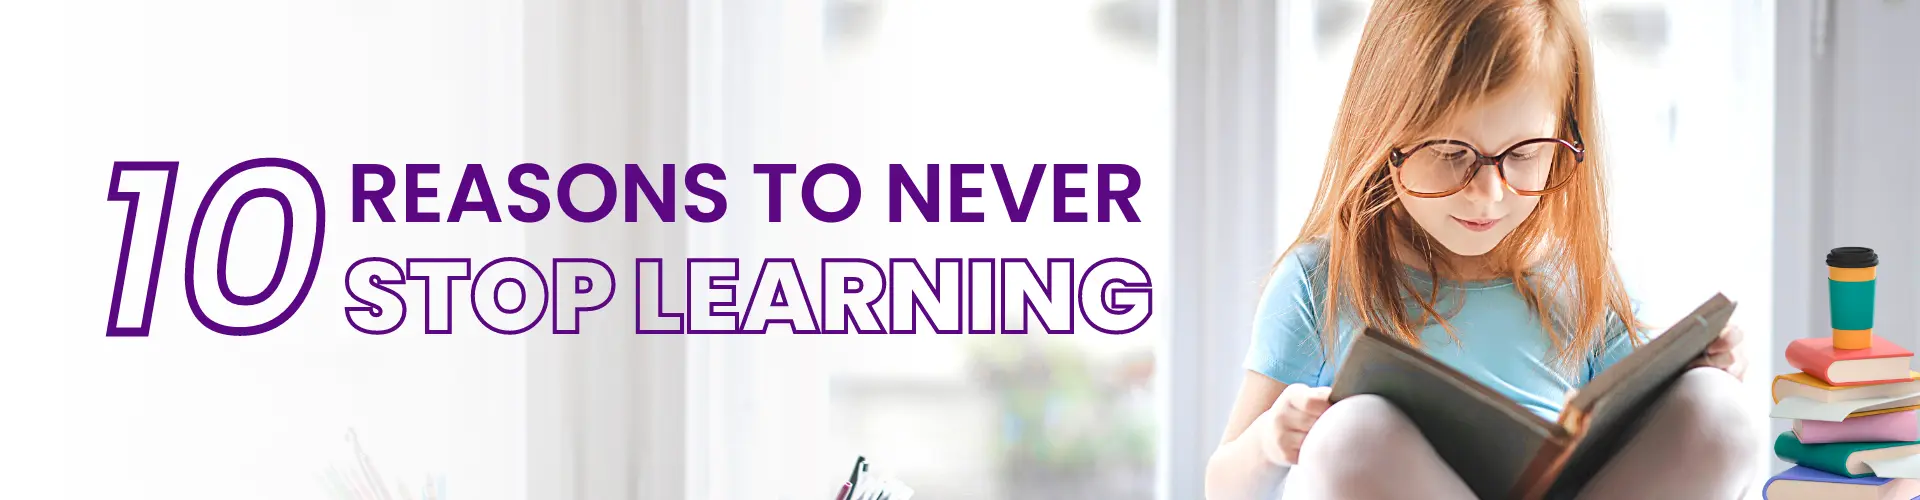 reasons to never stop learning